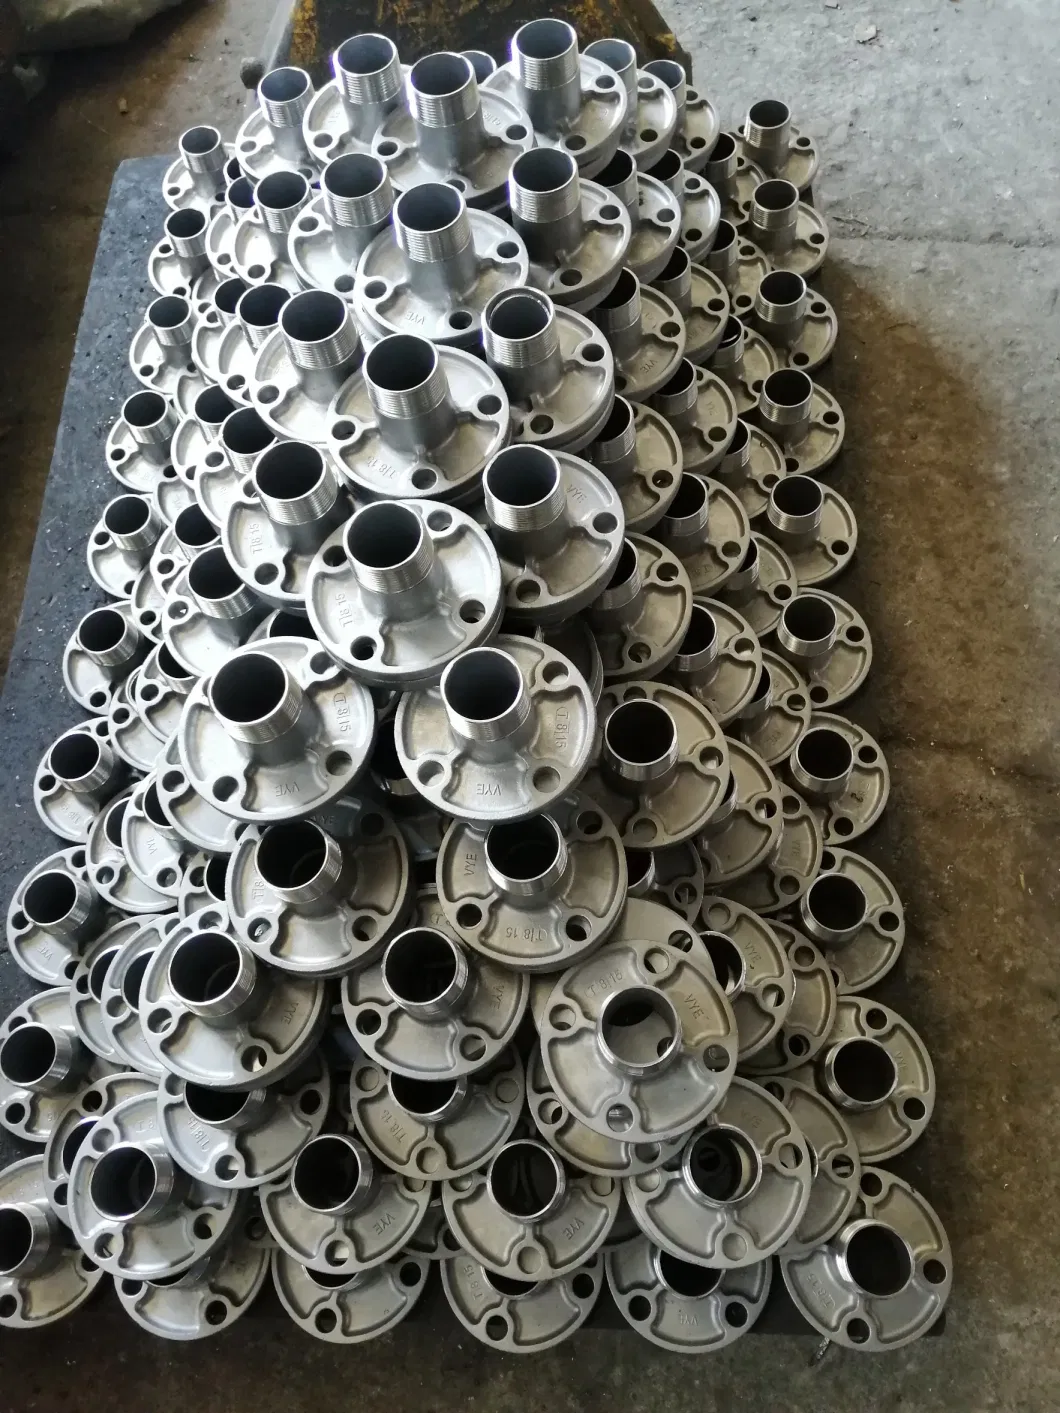 OEM Precision Lost Wax Investment Casting Alloy Steel for Wing Thread